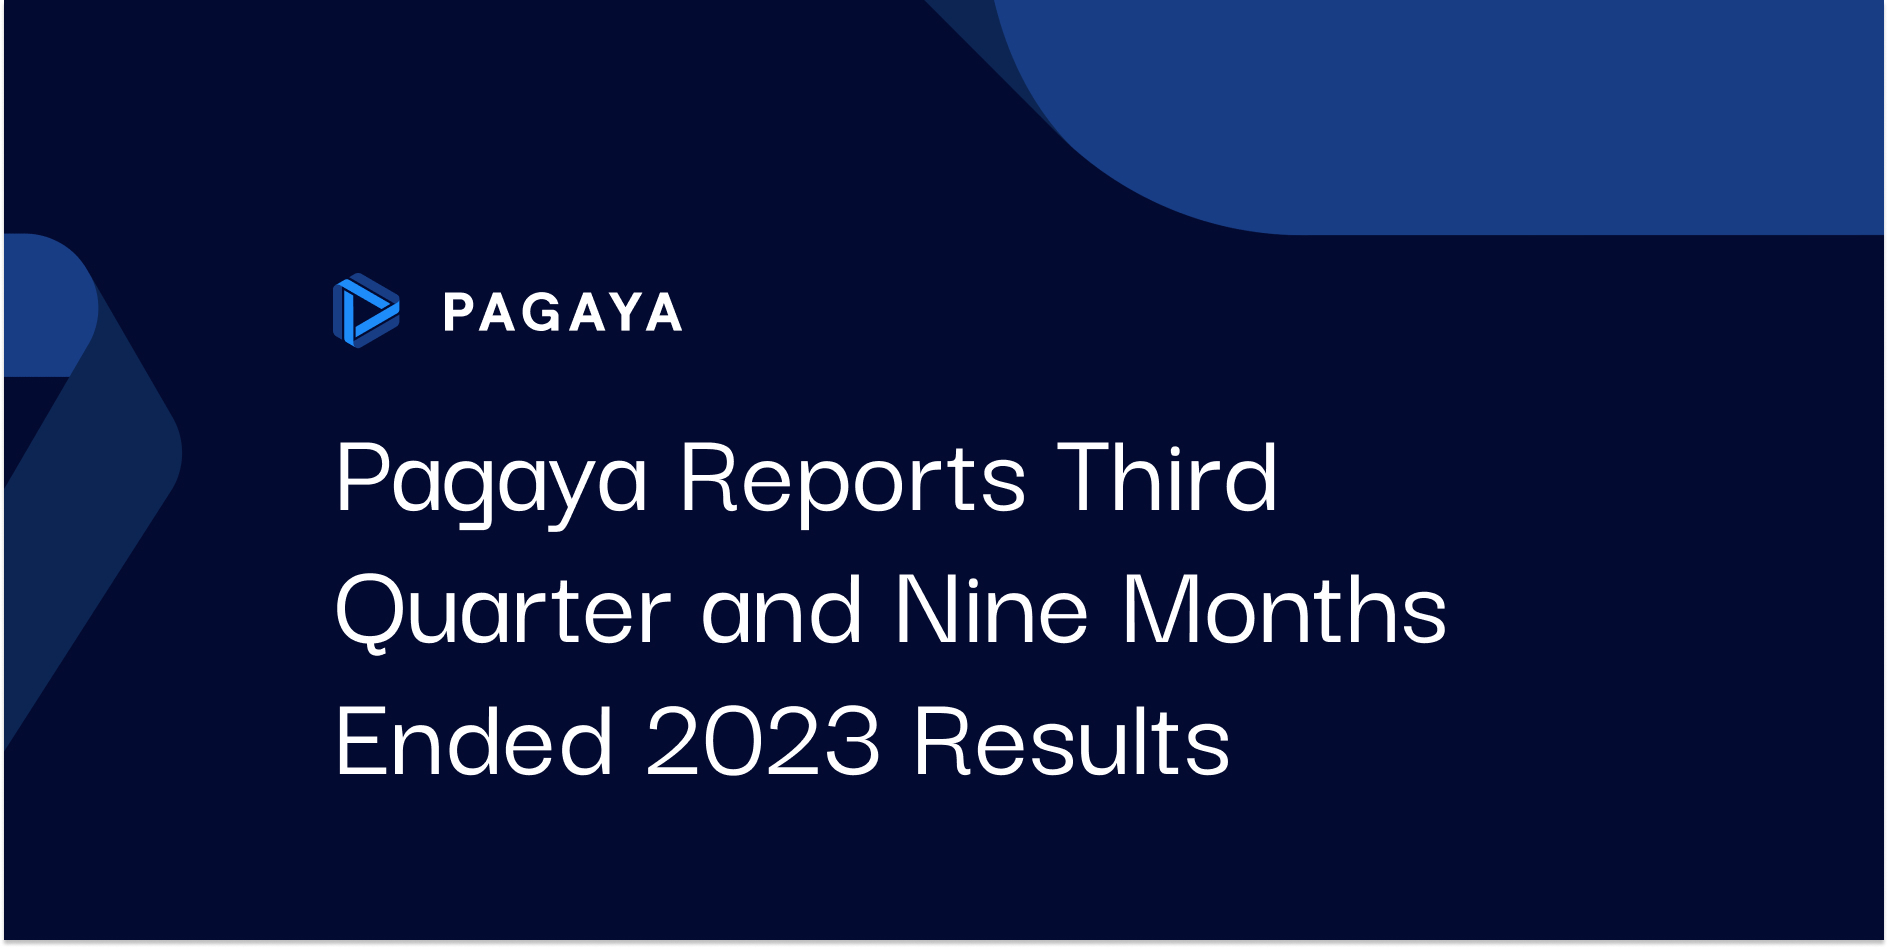 Pagaya Reports Third Quarter and Nine Months Ended 2023 Results